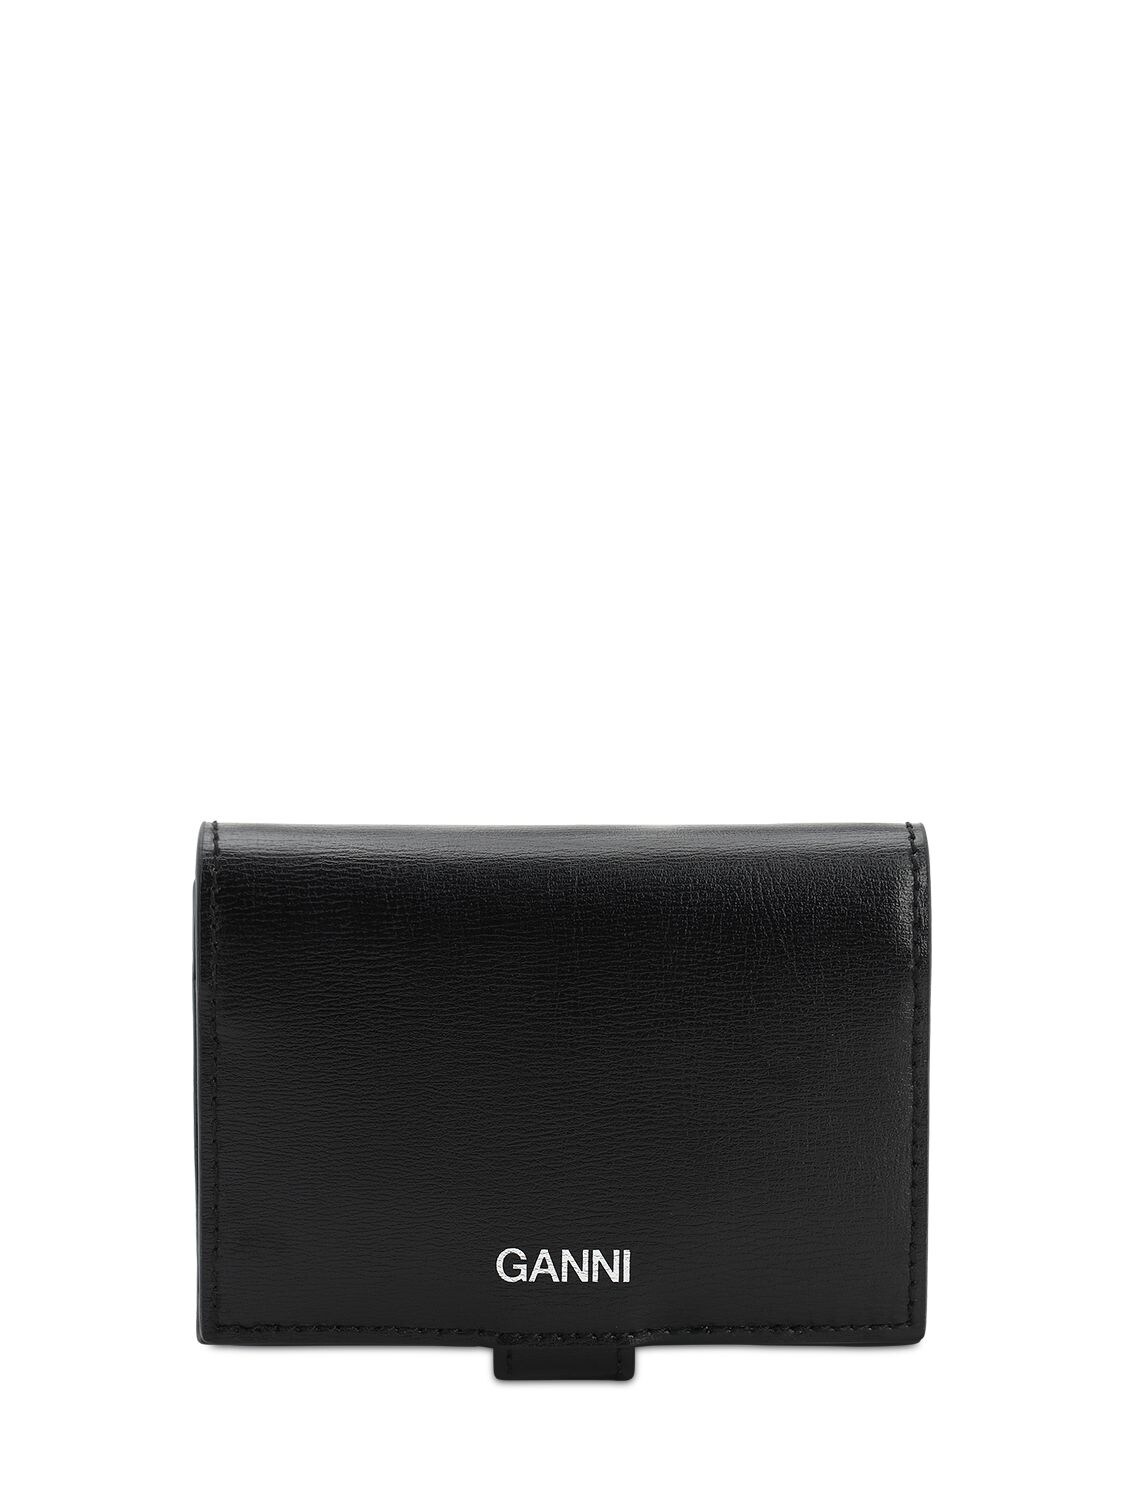 GANNI SMOOTH LEATHER COMPACT WALLET,71IJ5W013-MDK50